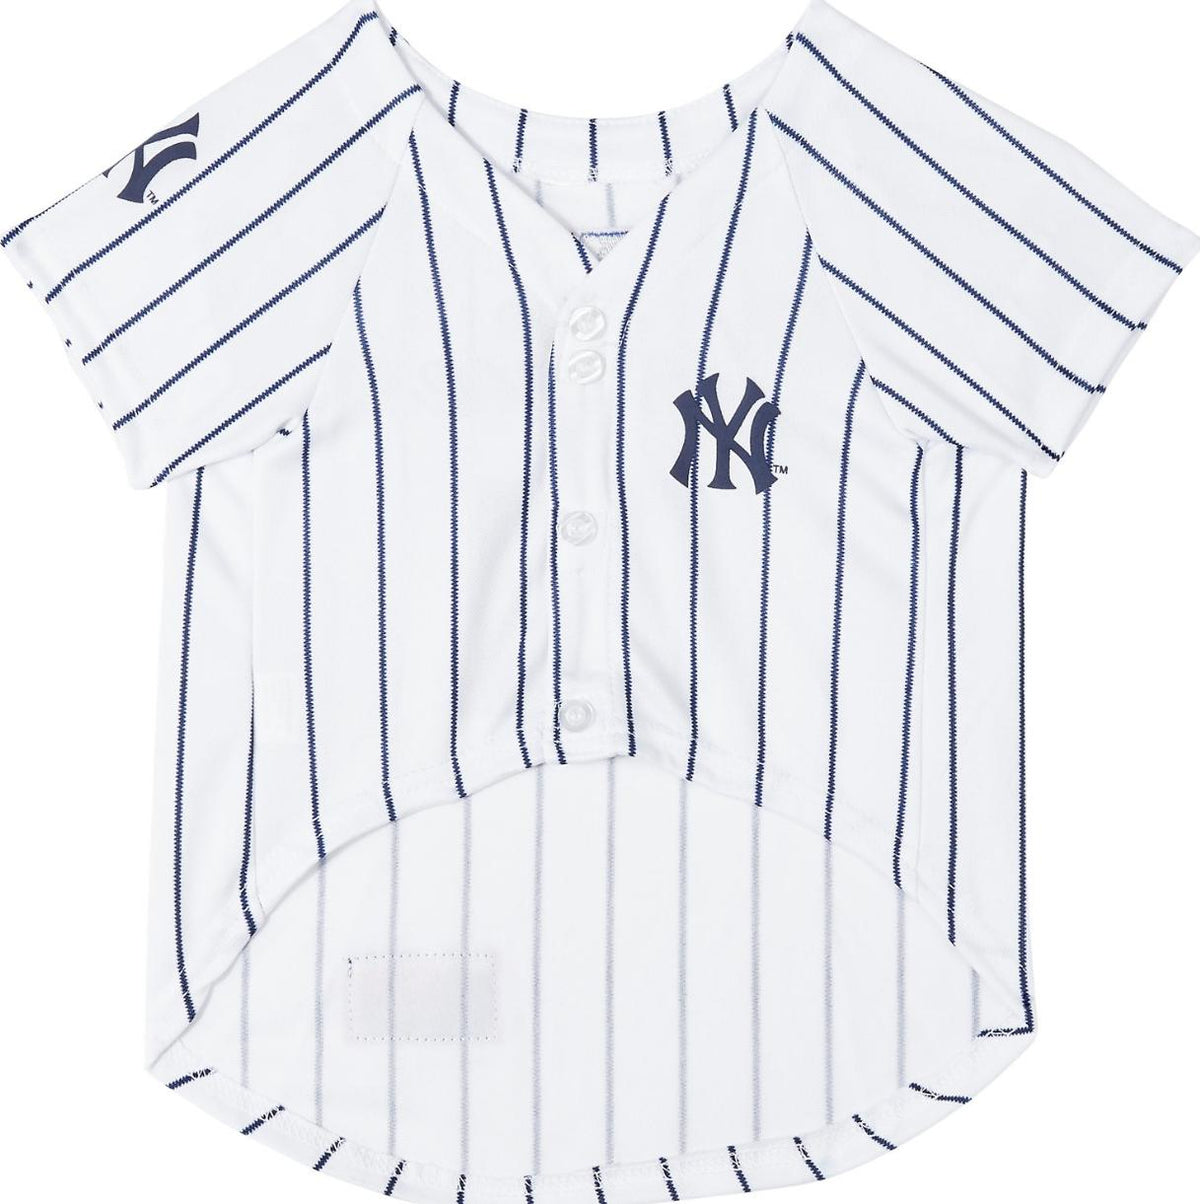 New York Yankees Pet Jersey – 3 Red Rovers